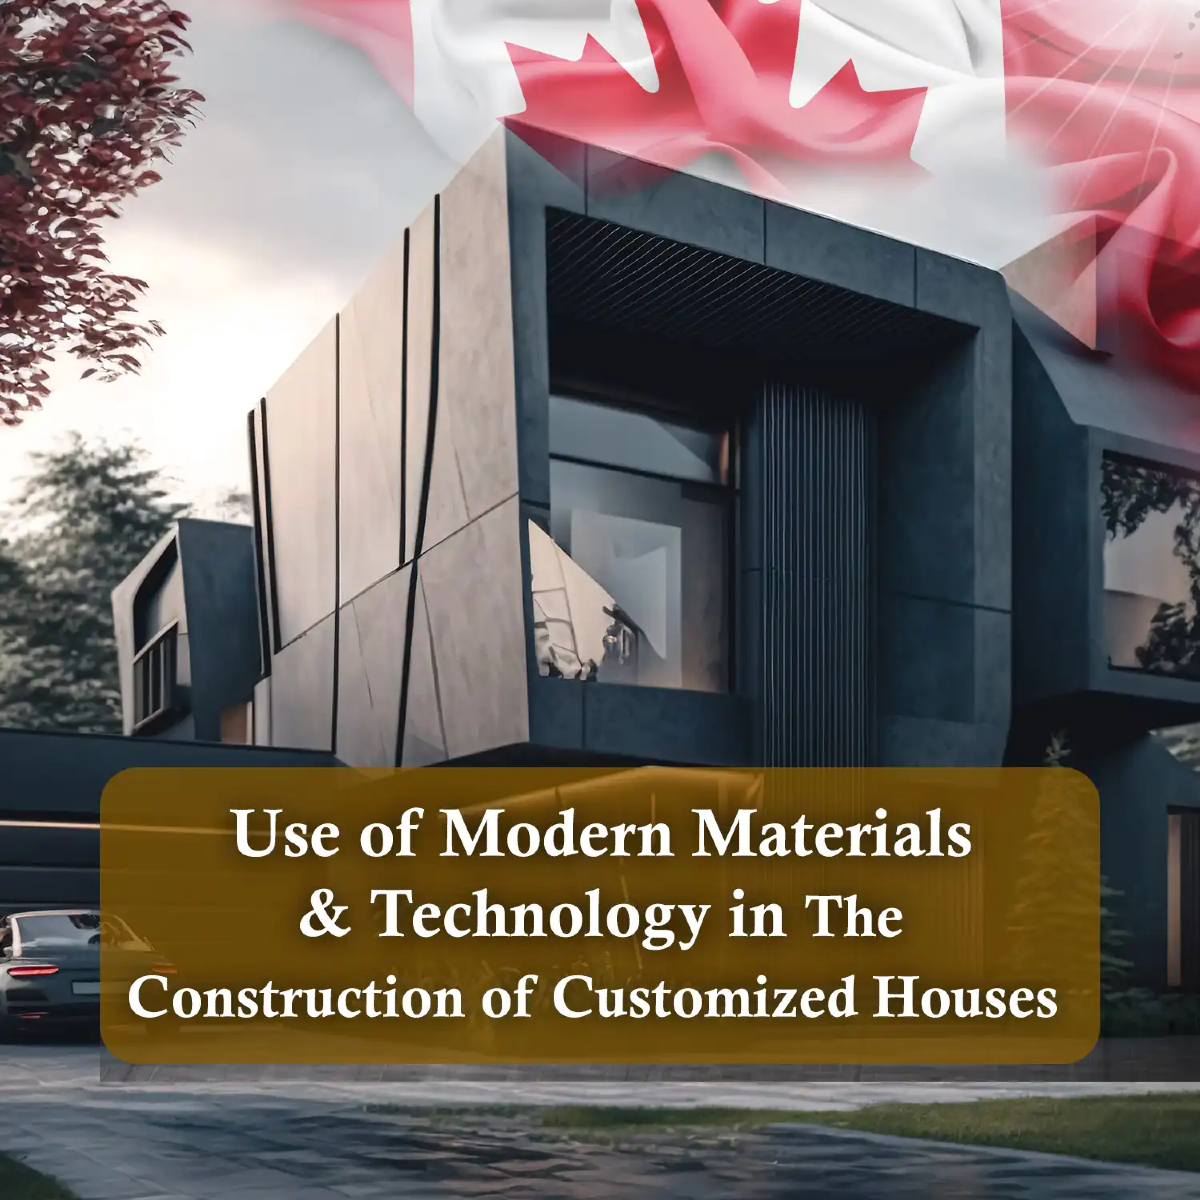 The use of modern materials and technology in the construction of modern custom houses